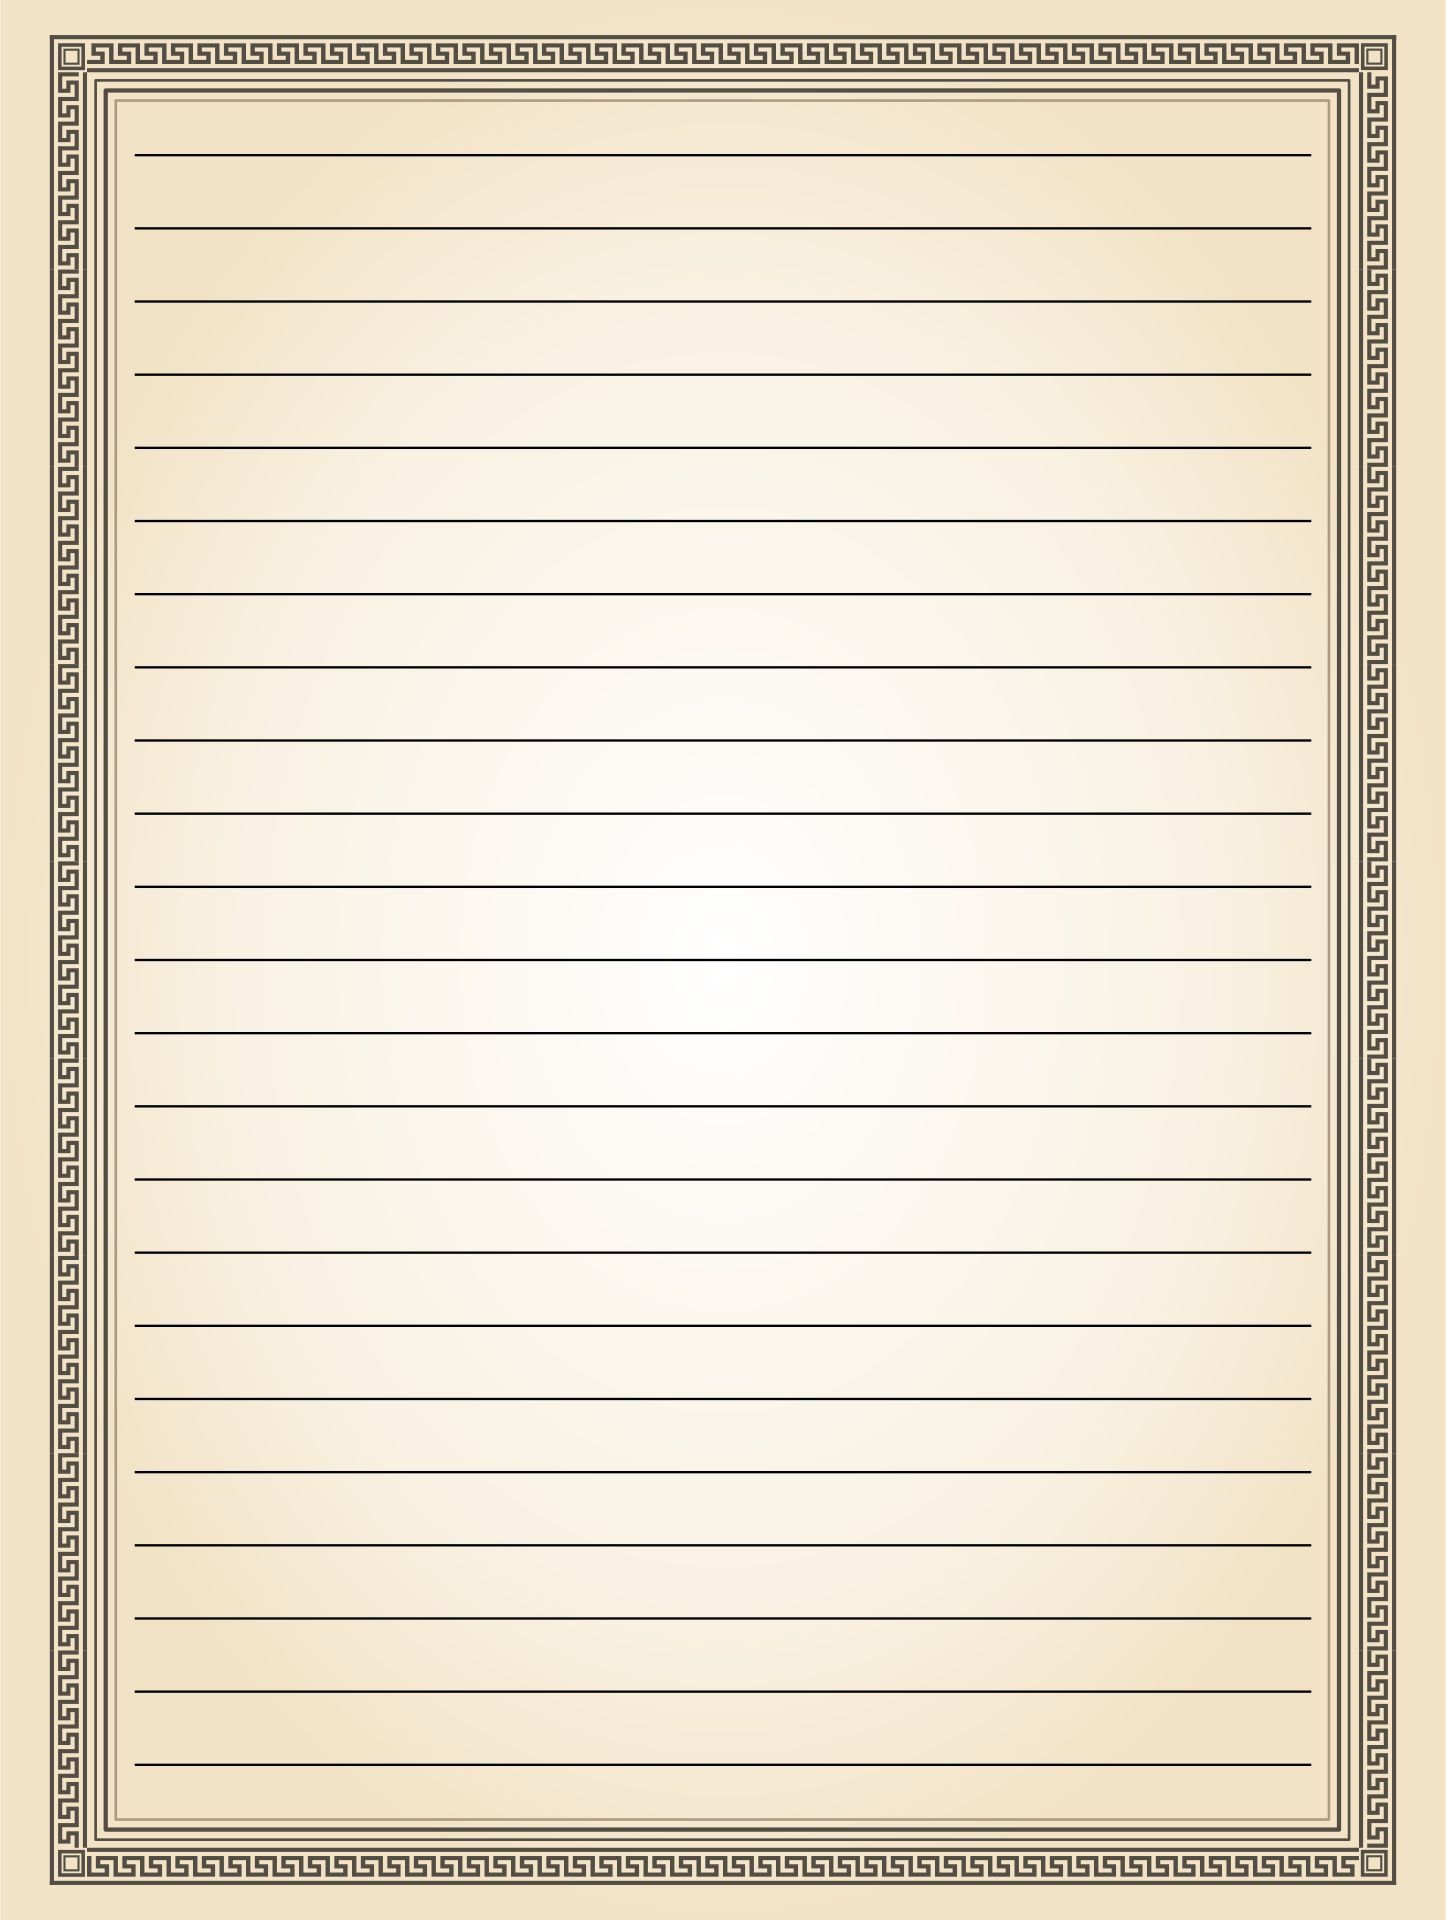 Printable Lined Paper With Borders_19700